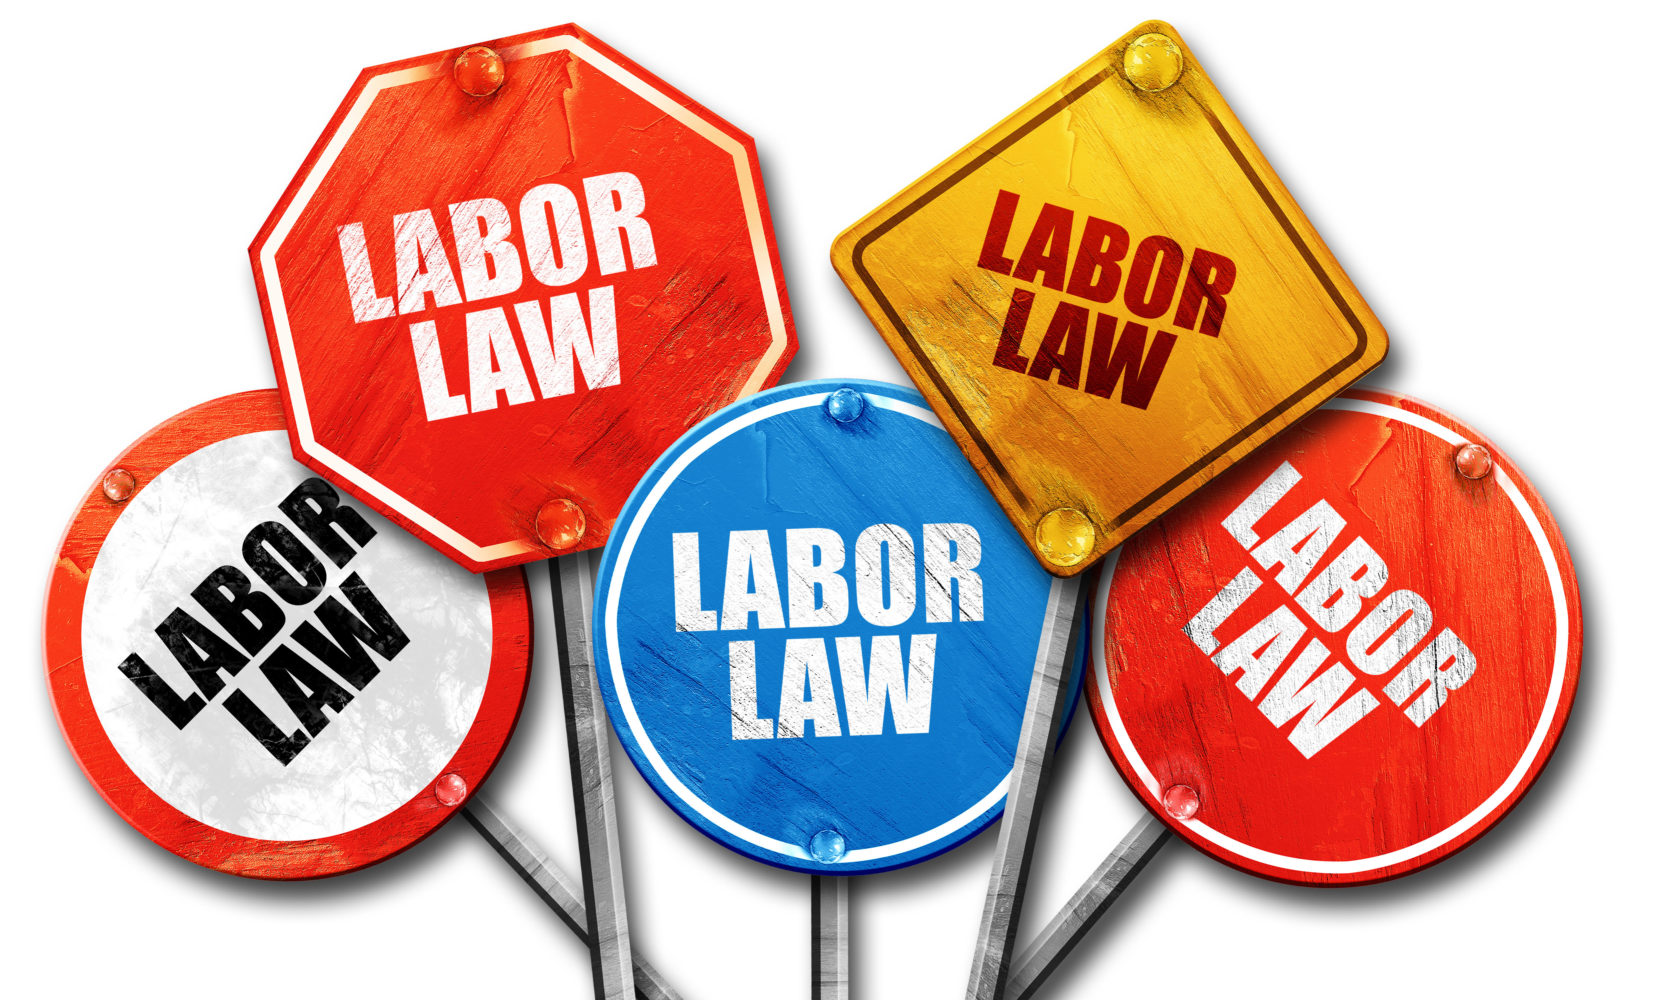 labor law, 3D rendering, rough street sign collection